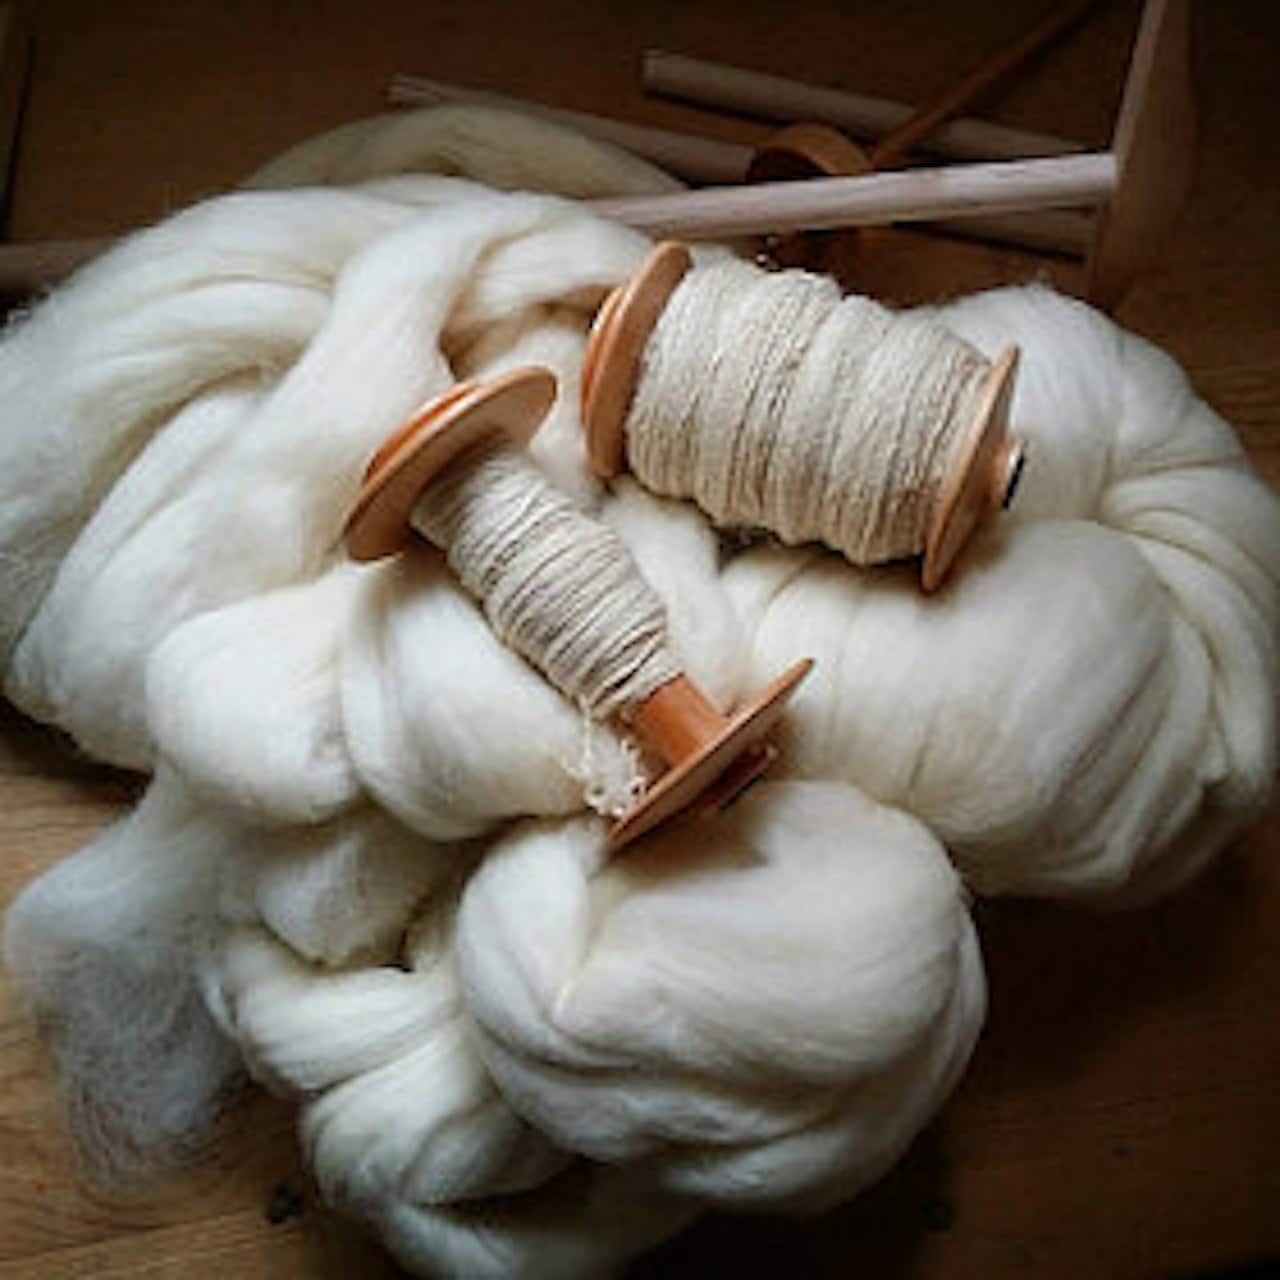 Spin Roving, Shep's Natural White Wool, Wool Top, Roving, Fiber, Spin Fiber, Wool Rove, Spinning Wool, Wool For Spinning into Yarn